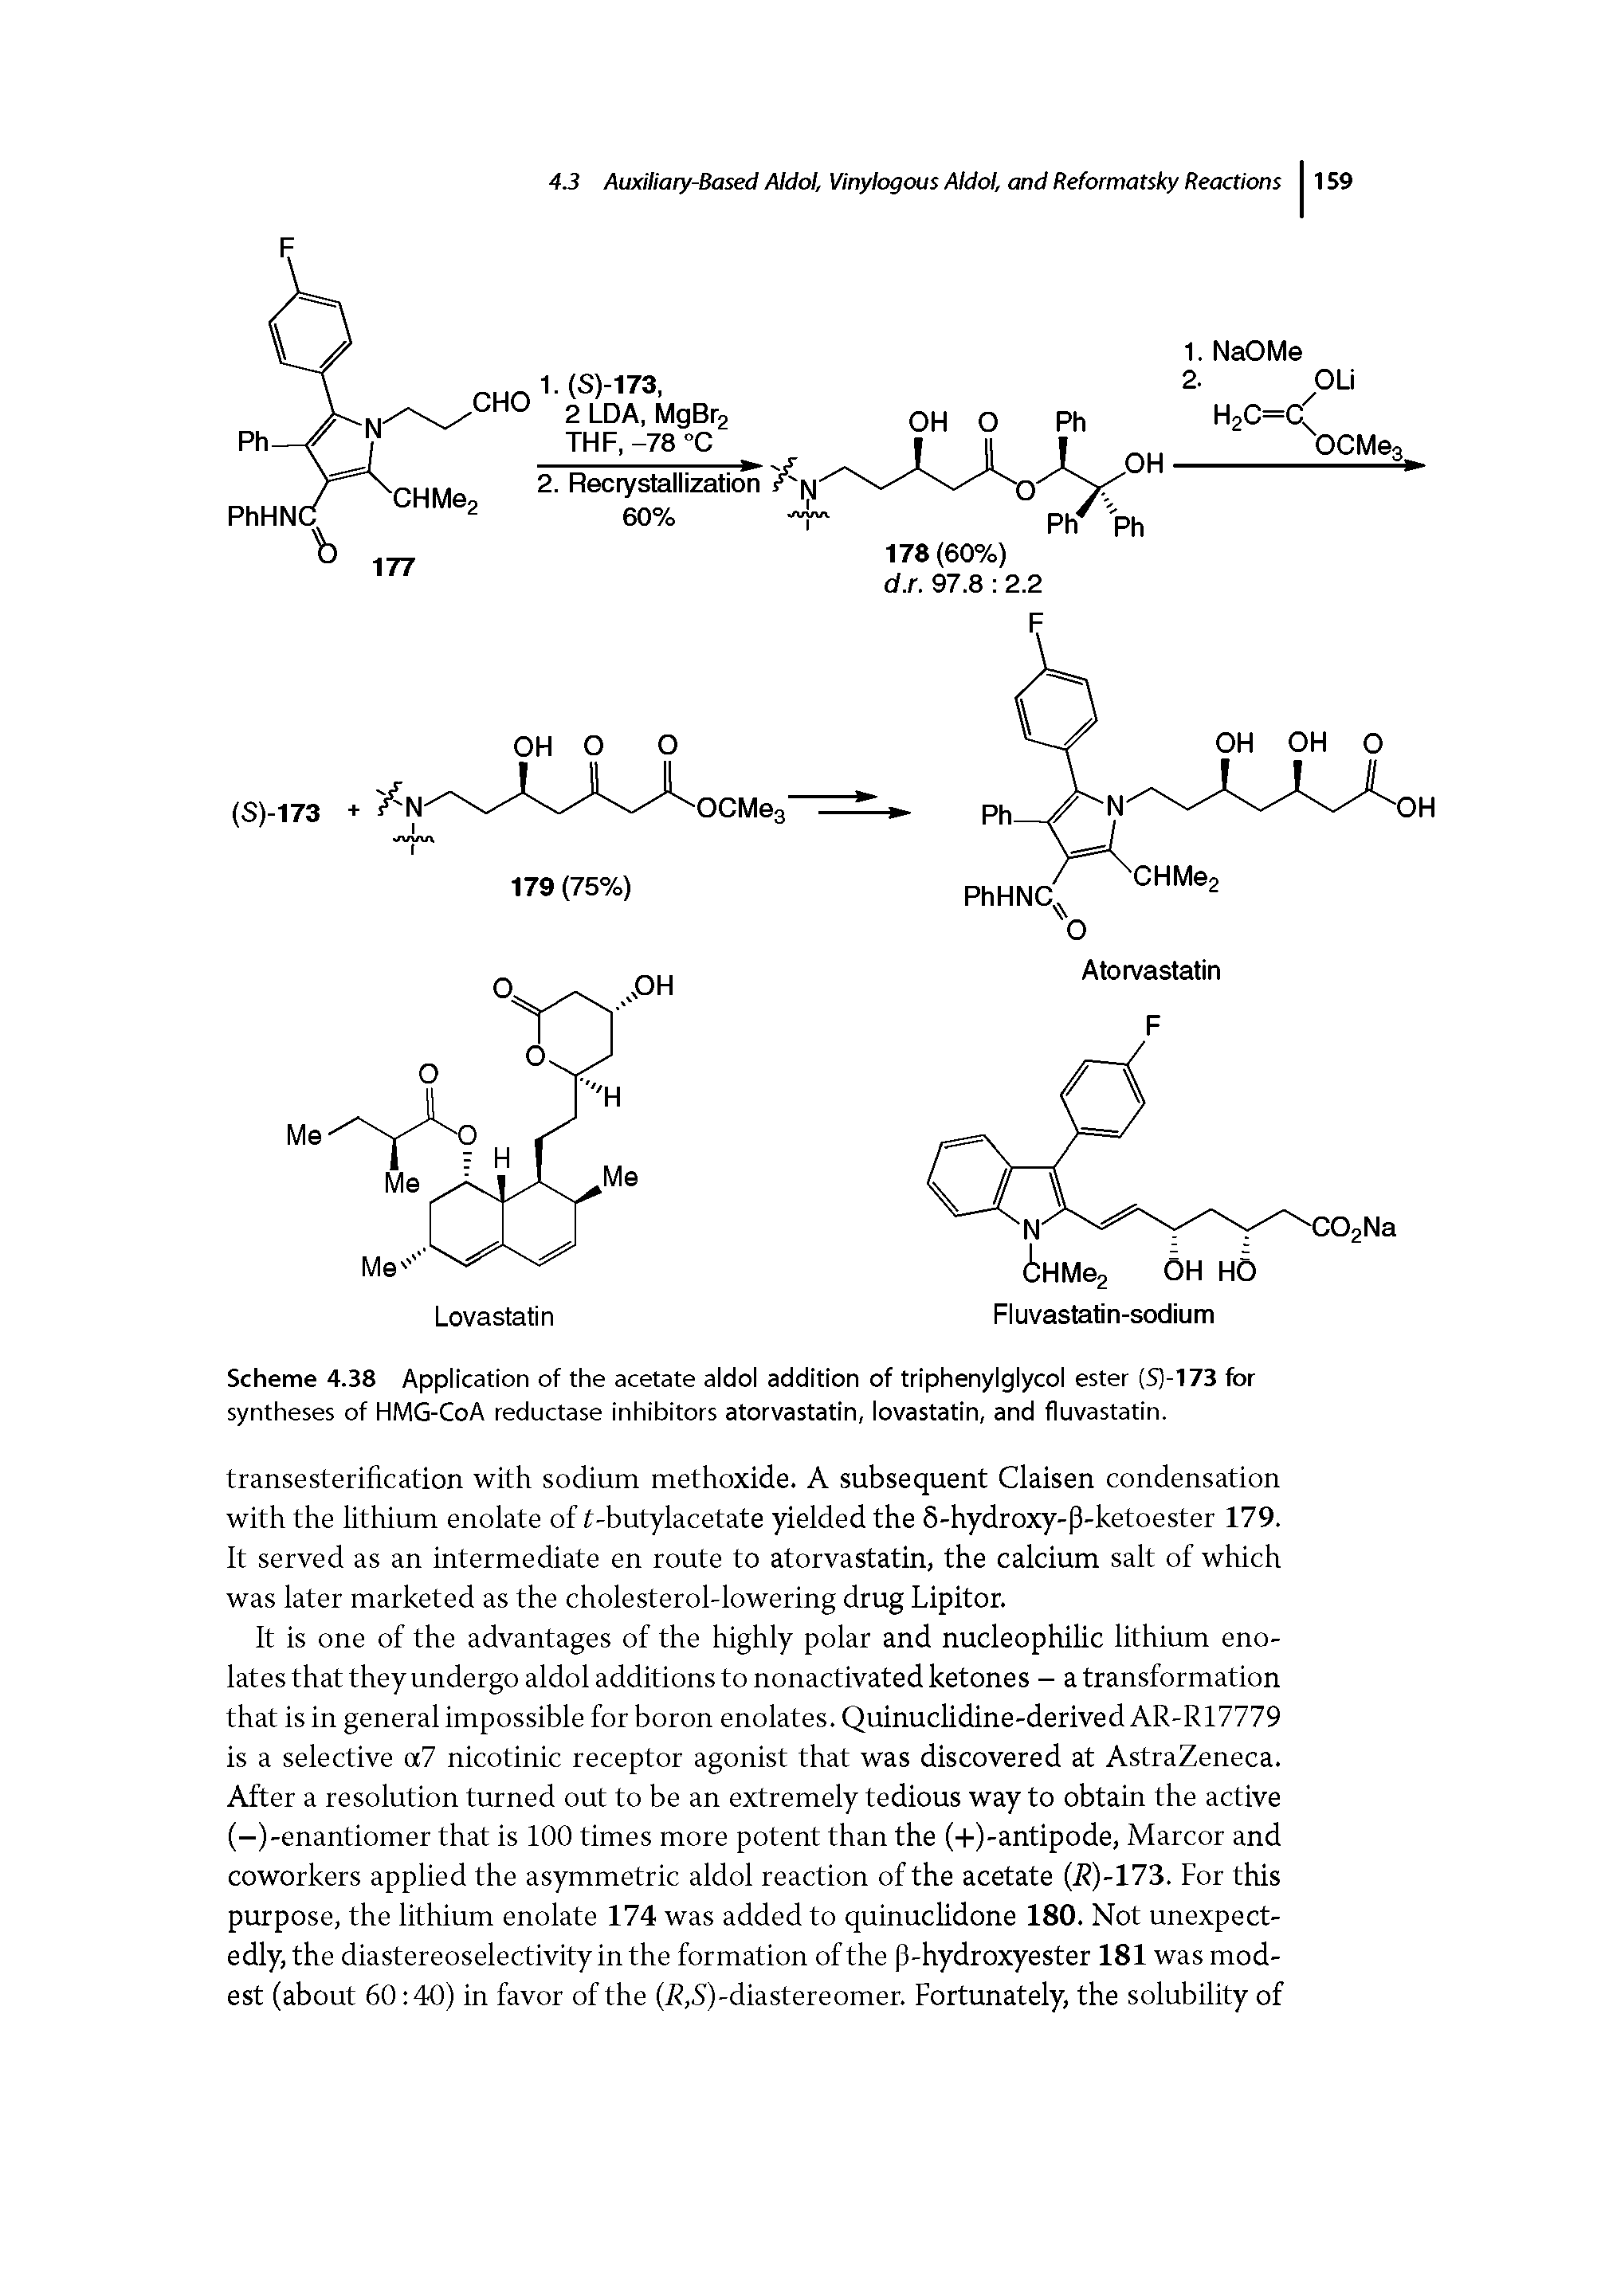 Scheme 4.38 Application of the acetate aldol addition of triphenylglycol ester (S)-173 for syntheses of HMG-CoA reductase inhibitors atorvastatin, lovastatin, and fluvastatin.